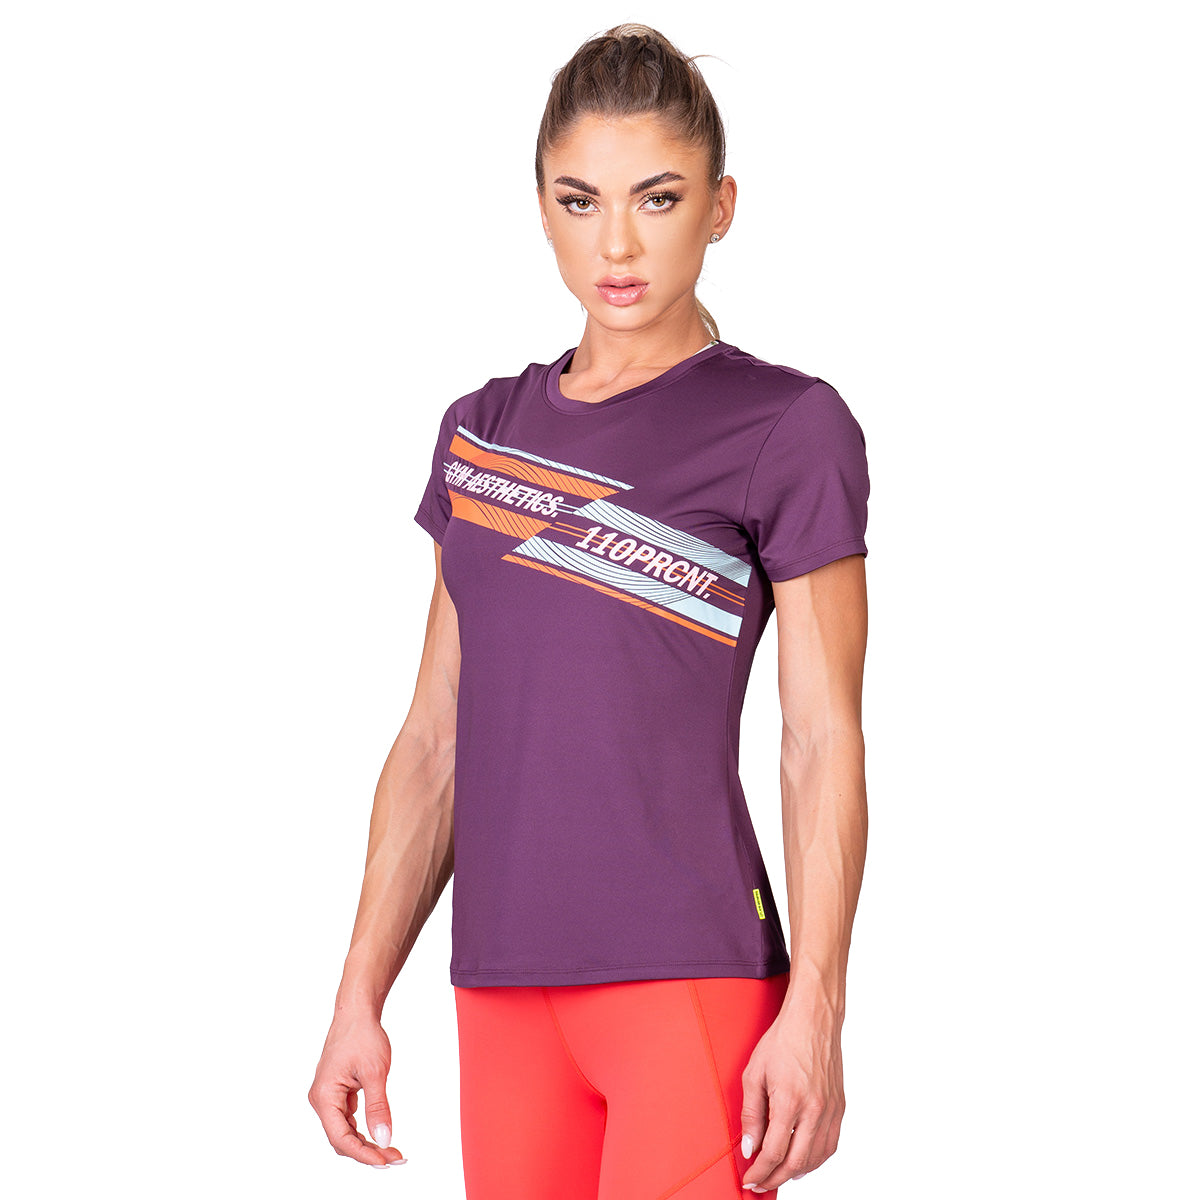 Activewear 110PRCNT Tight-Fit T-Shirt for Women | Gym Aesthetics – Gym ...